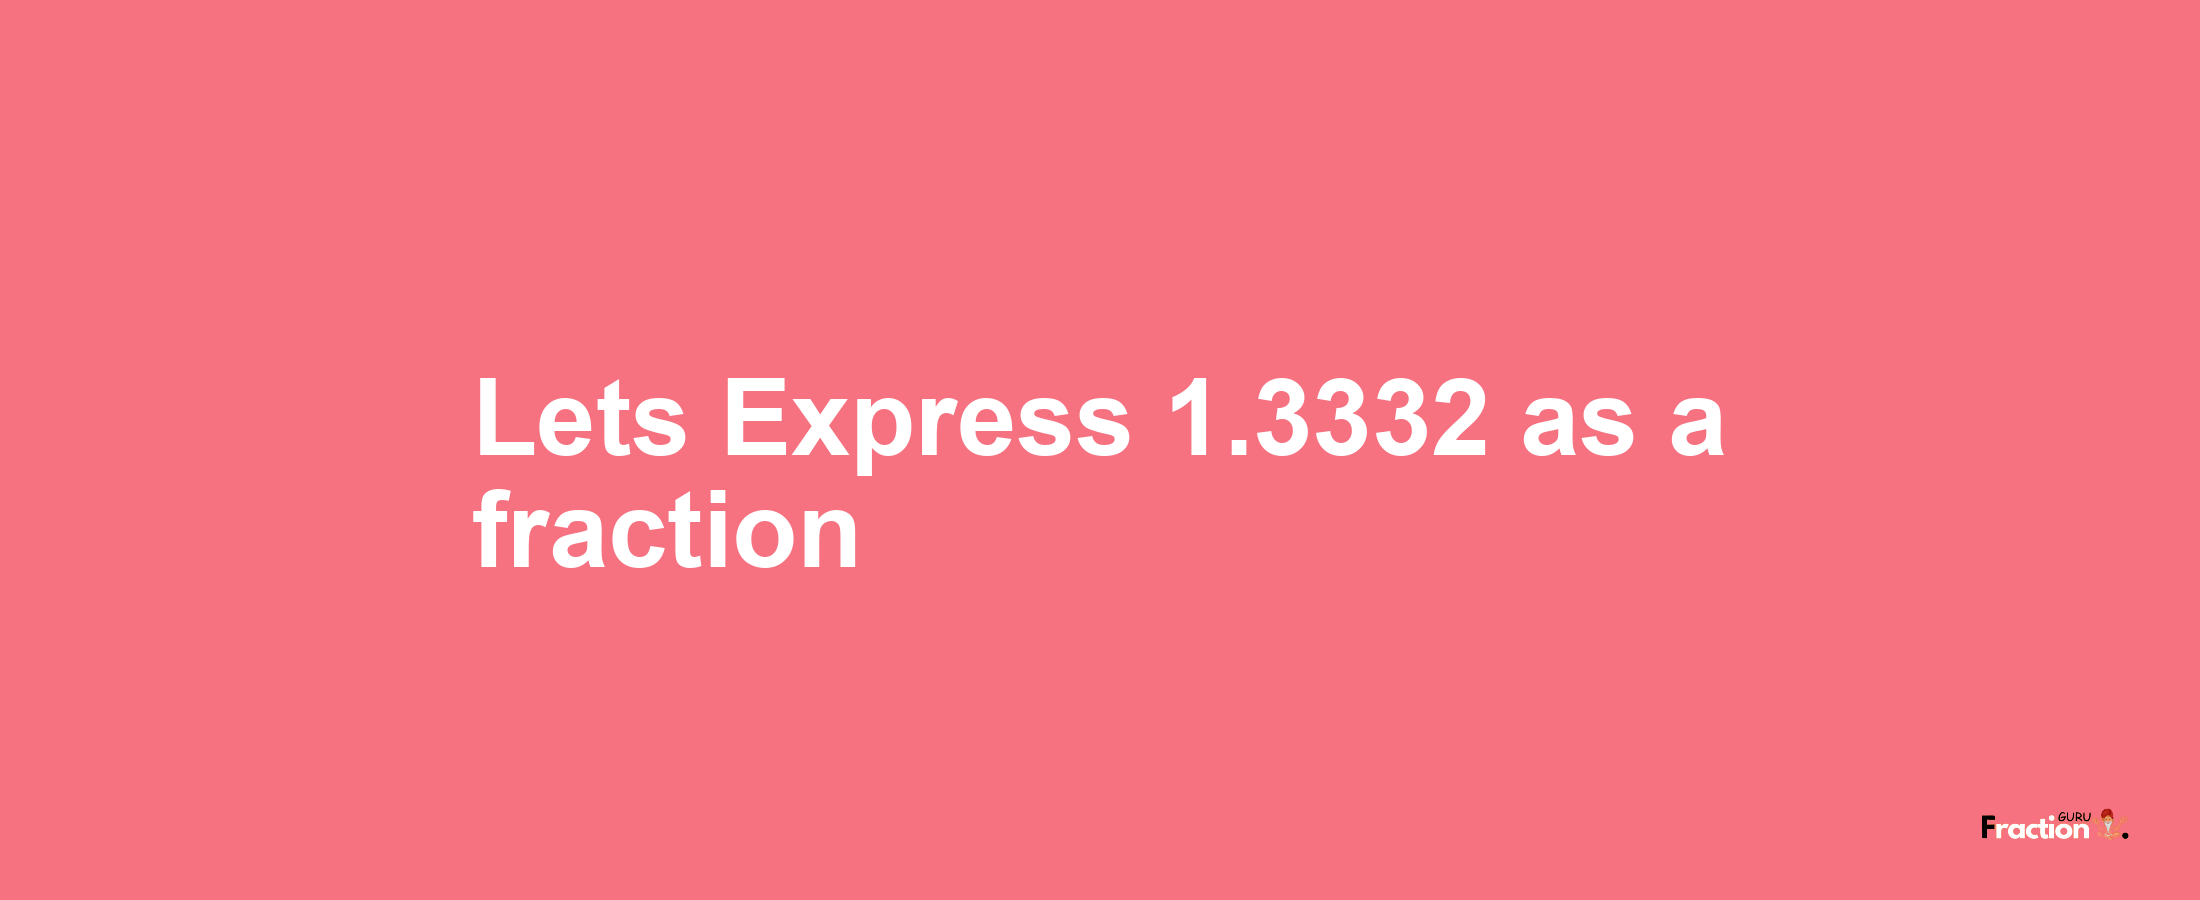 Lets Express 1.3332 as afraction